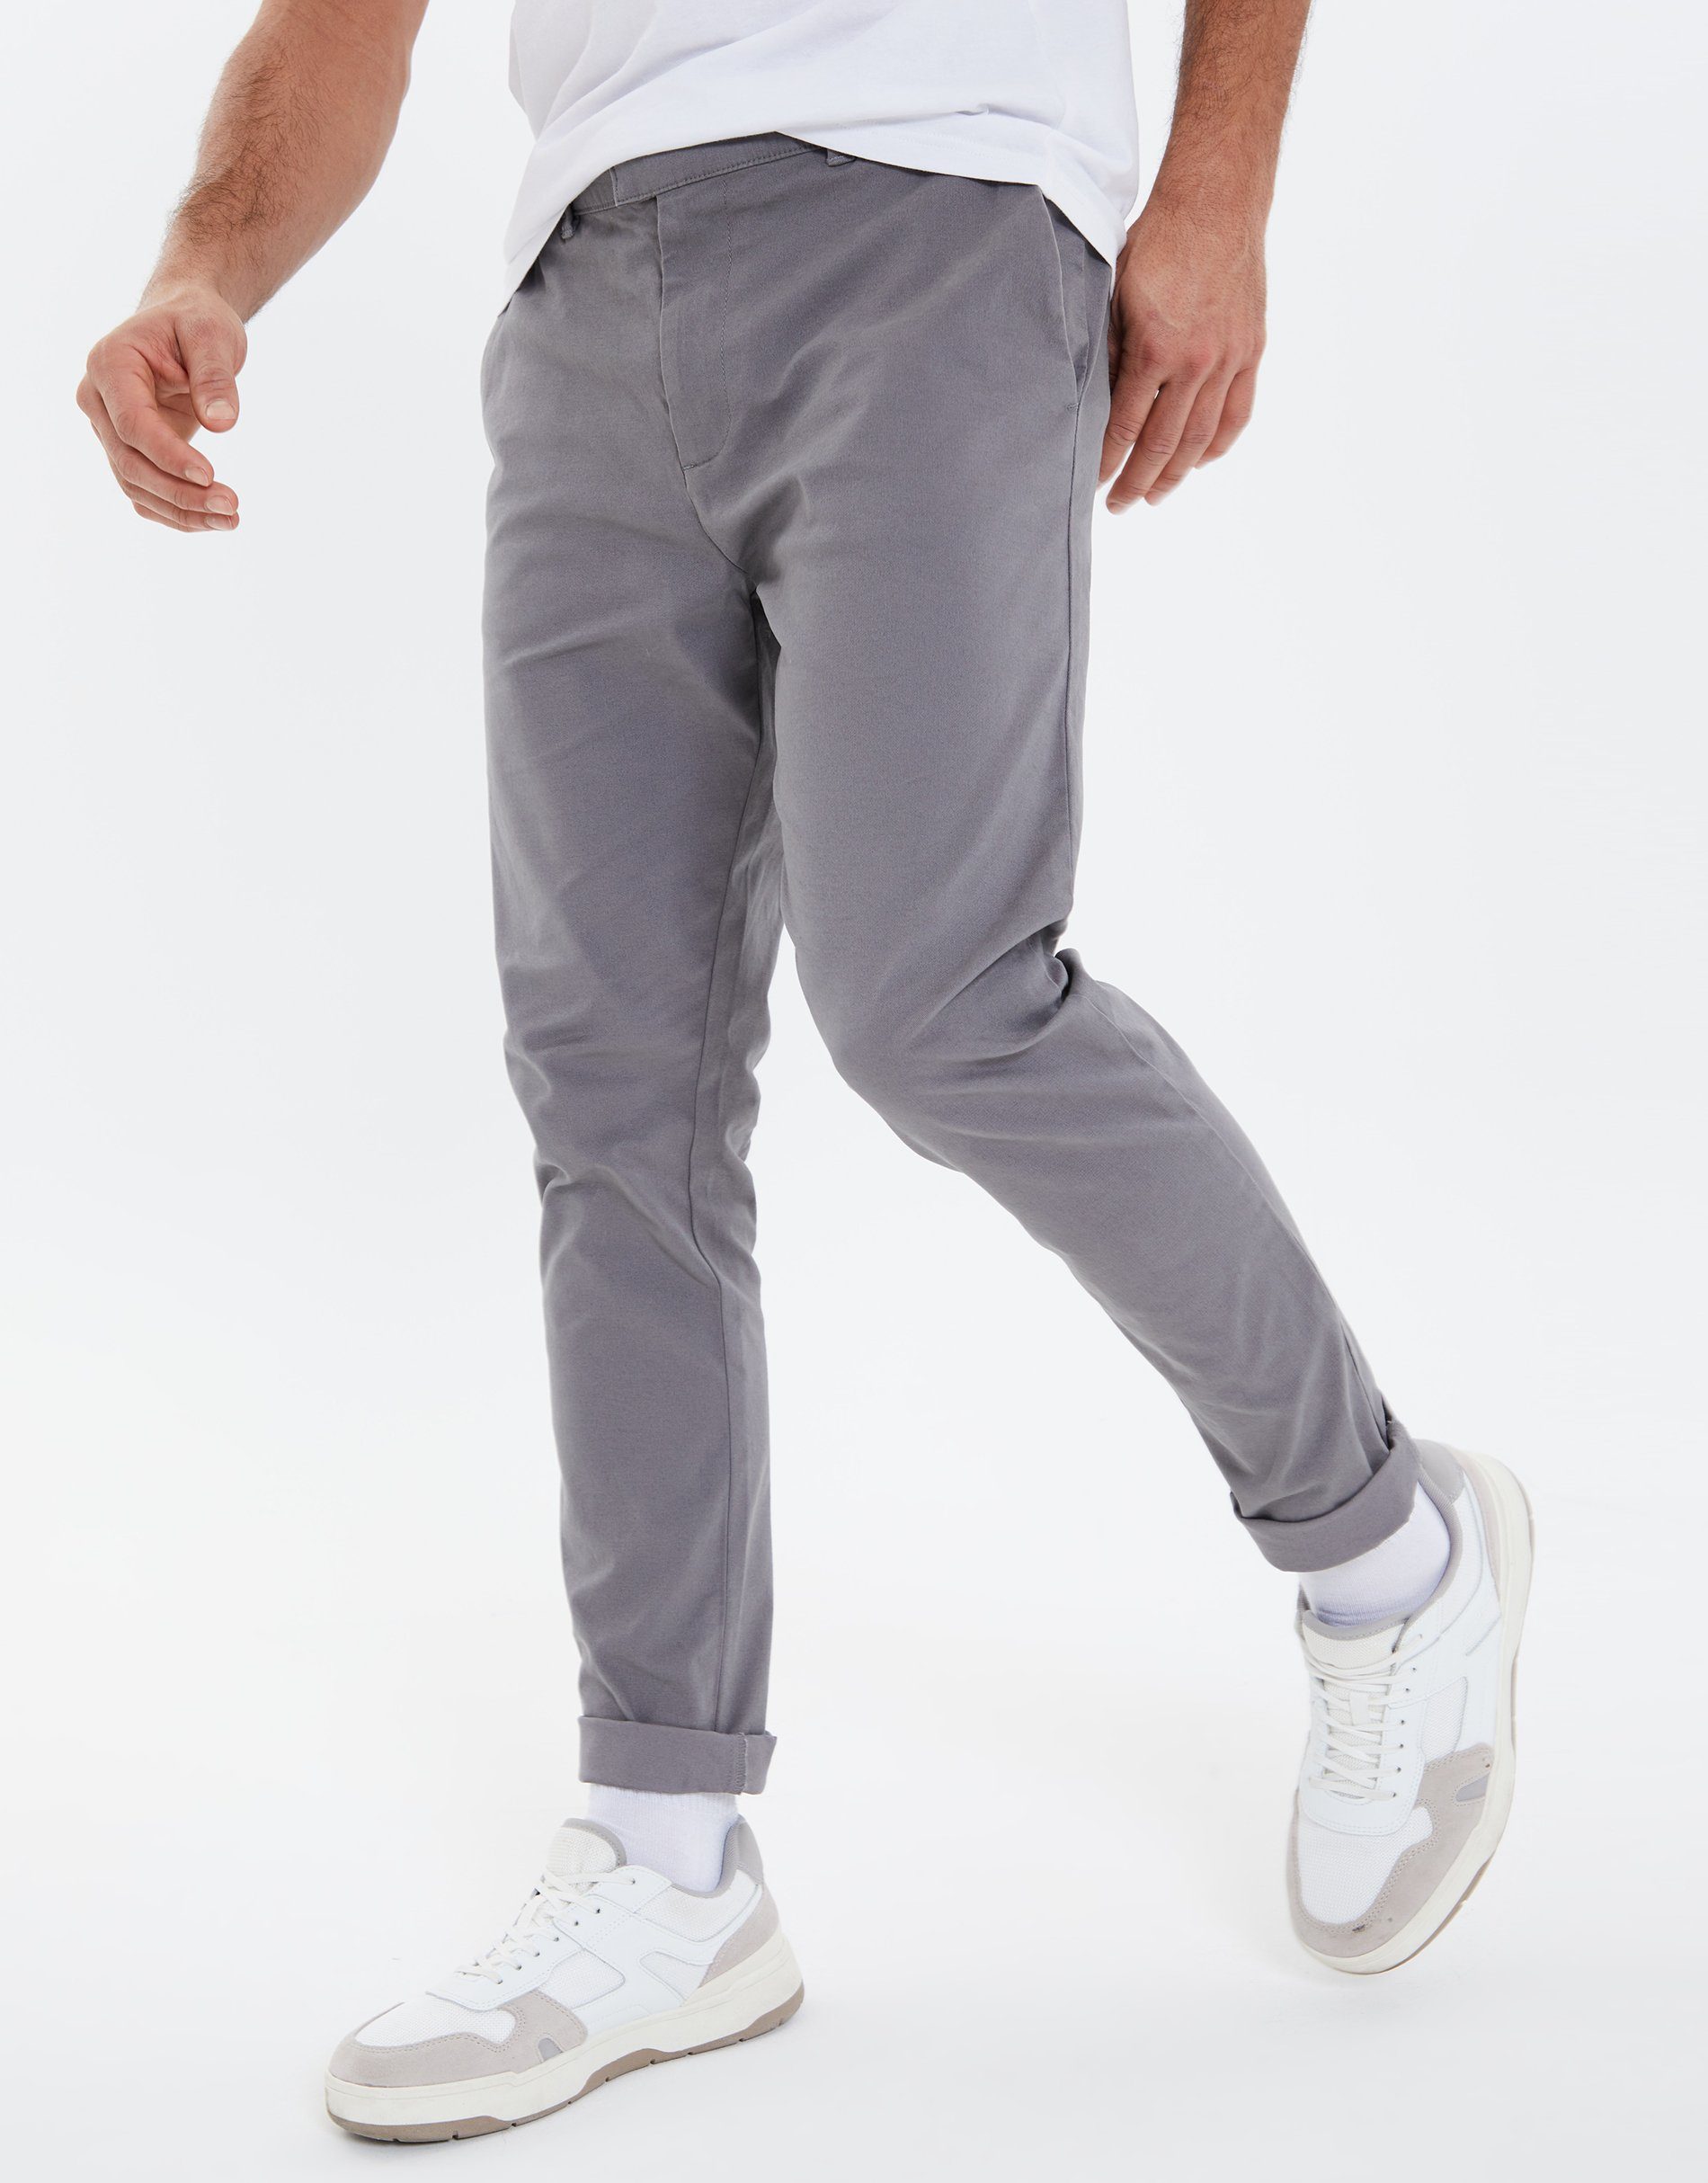 THB Stretch Marley Chino Trouser Chinohose Charcoal Threadbare